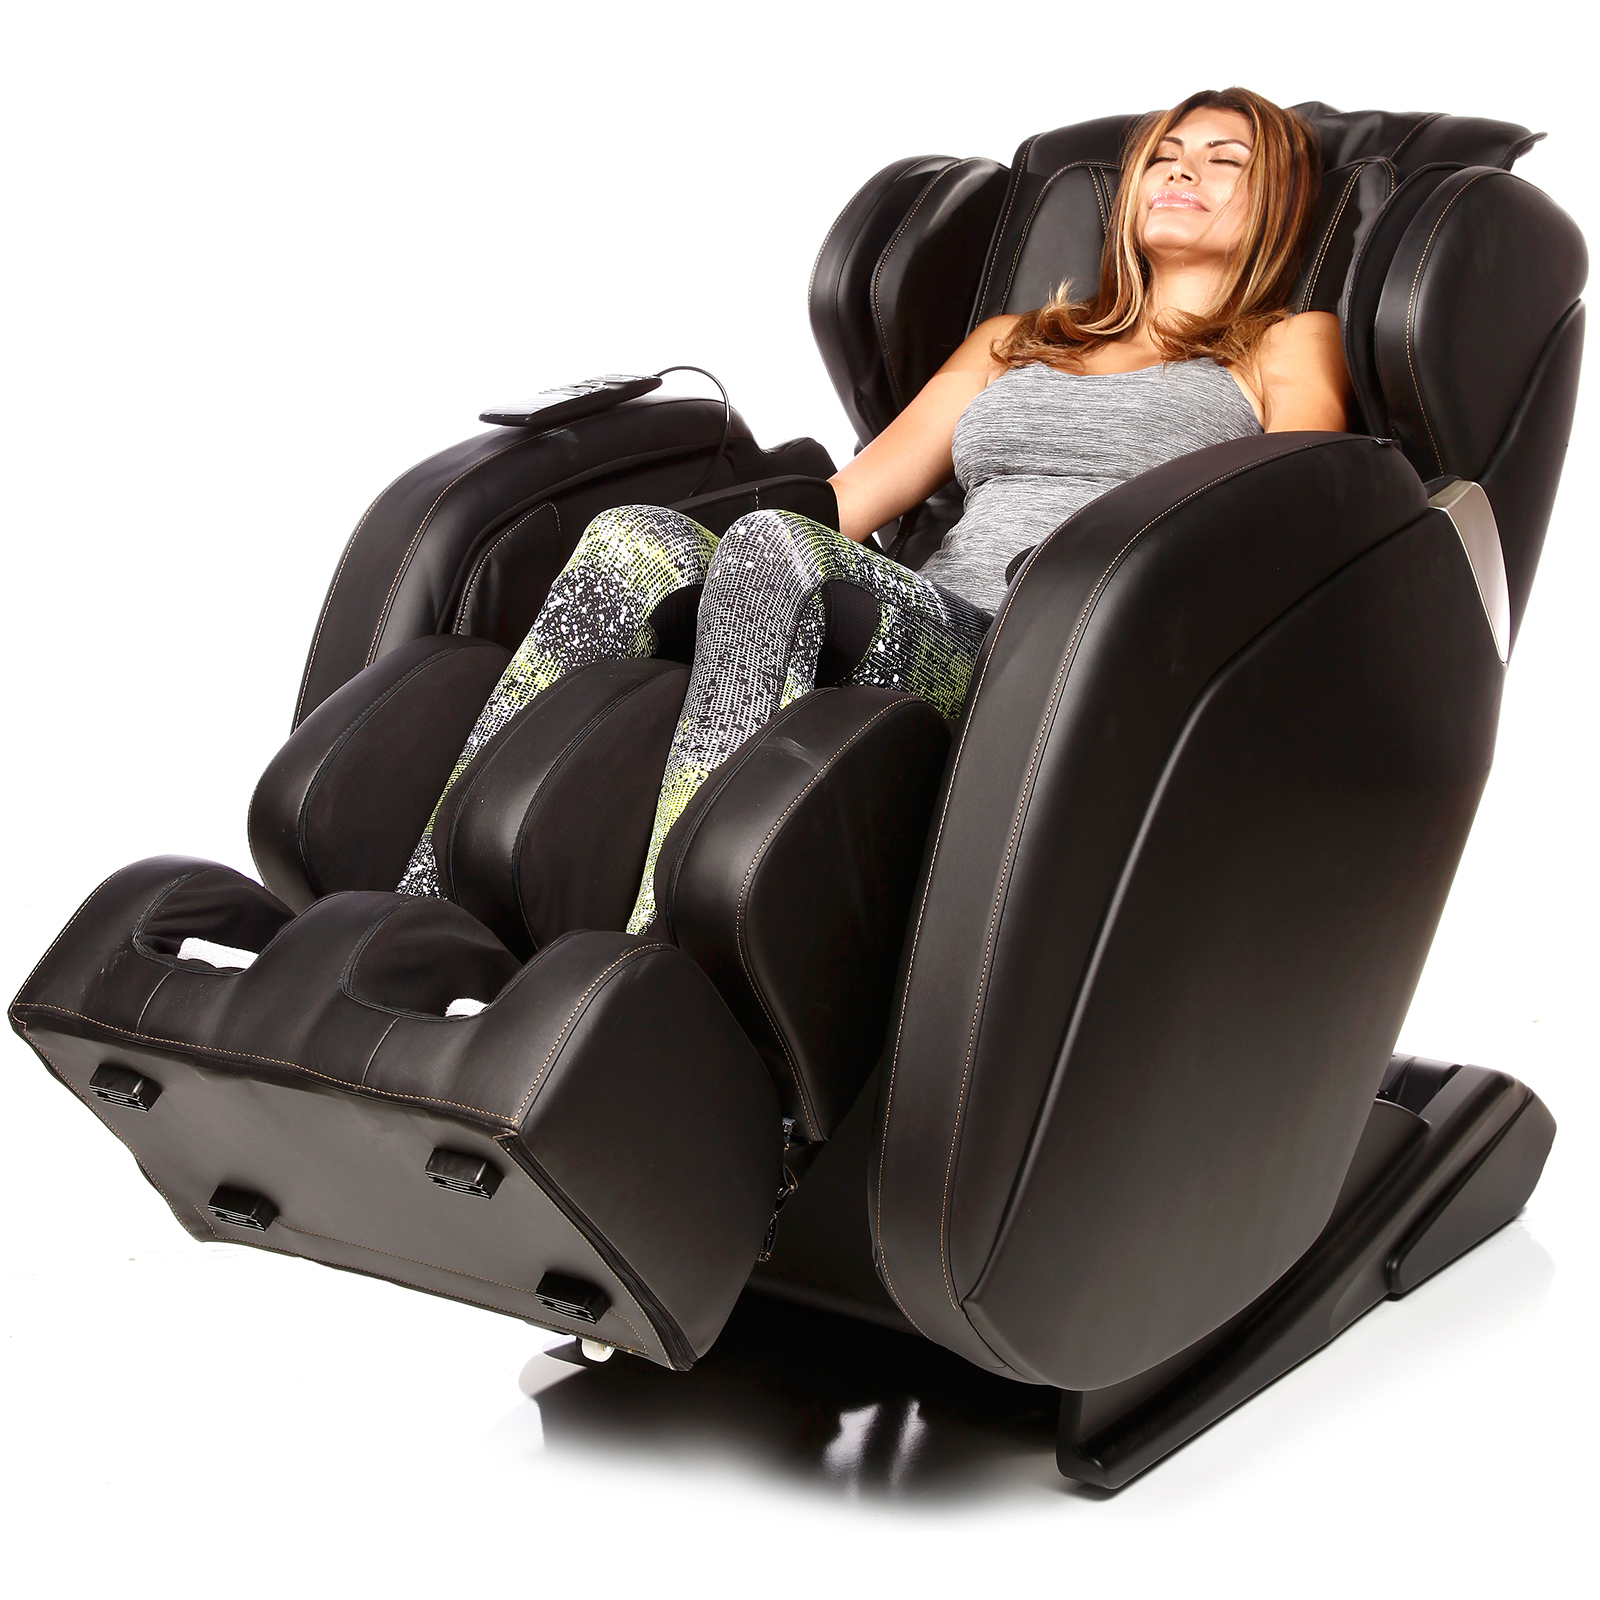 Dynamic Chair Ideas: 7 Tips On How To Choose The Best Massage Chair In